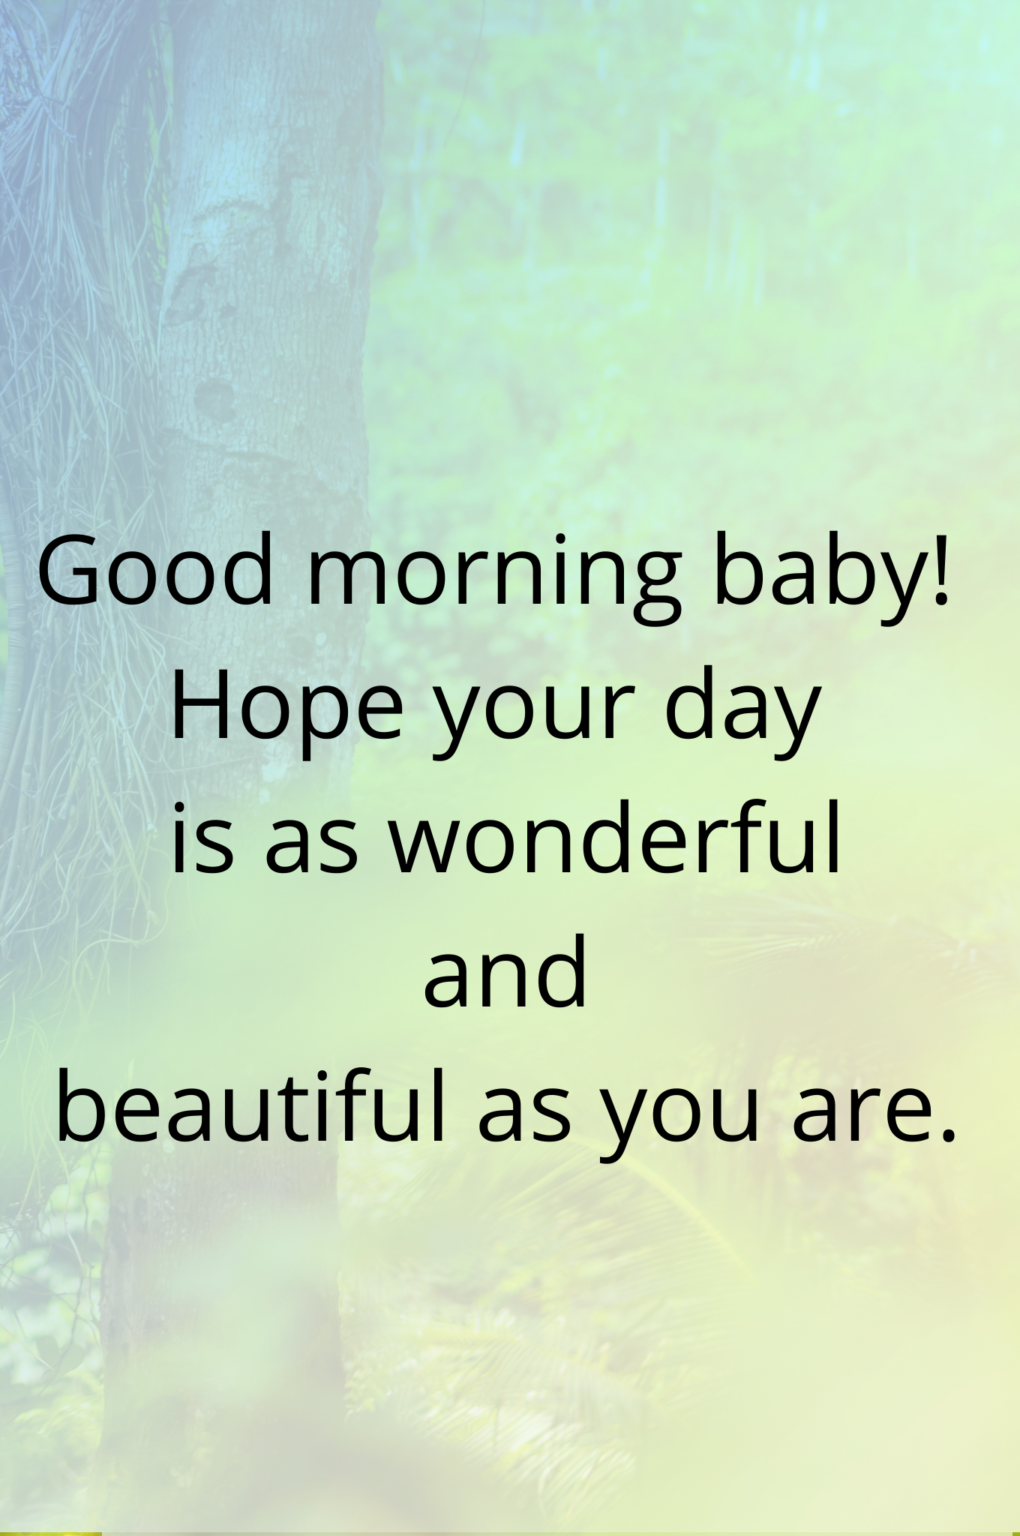 100+ Thoughtful And Romantic Good Morning Messages